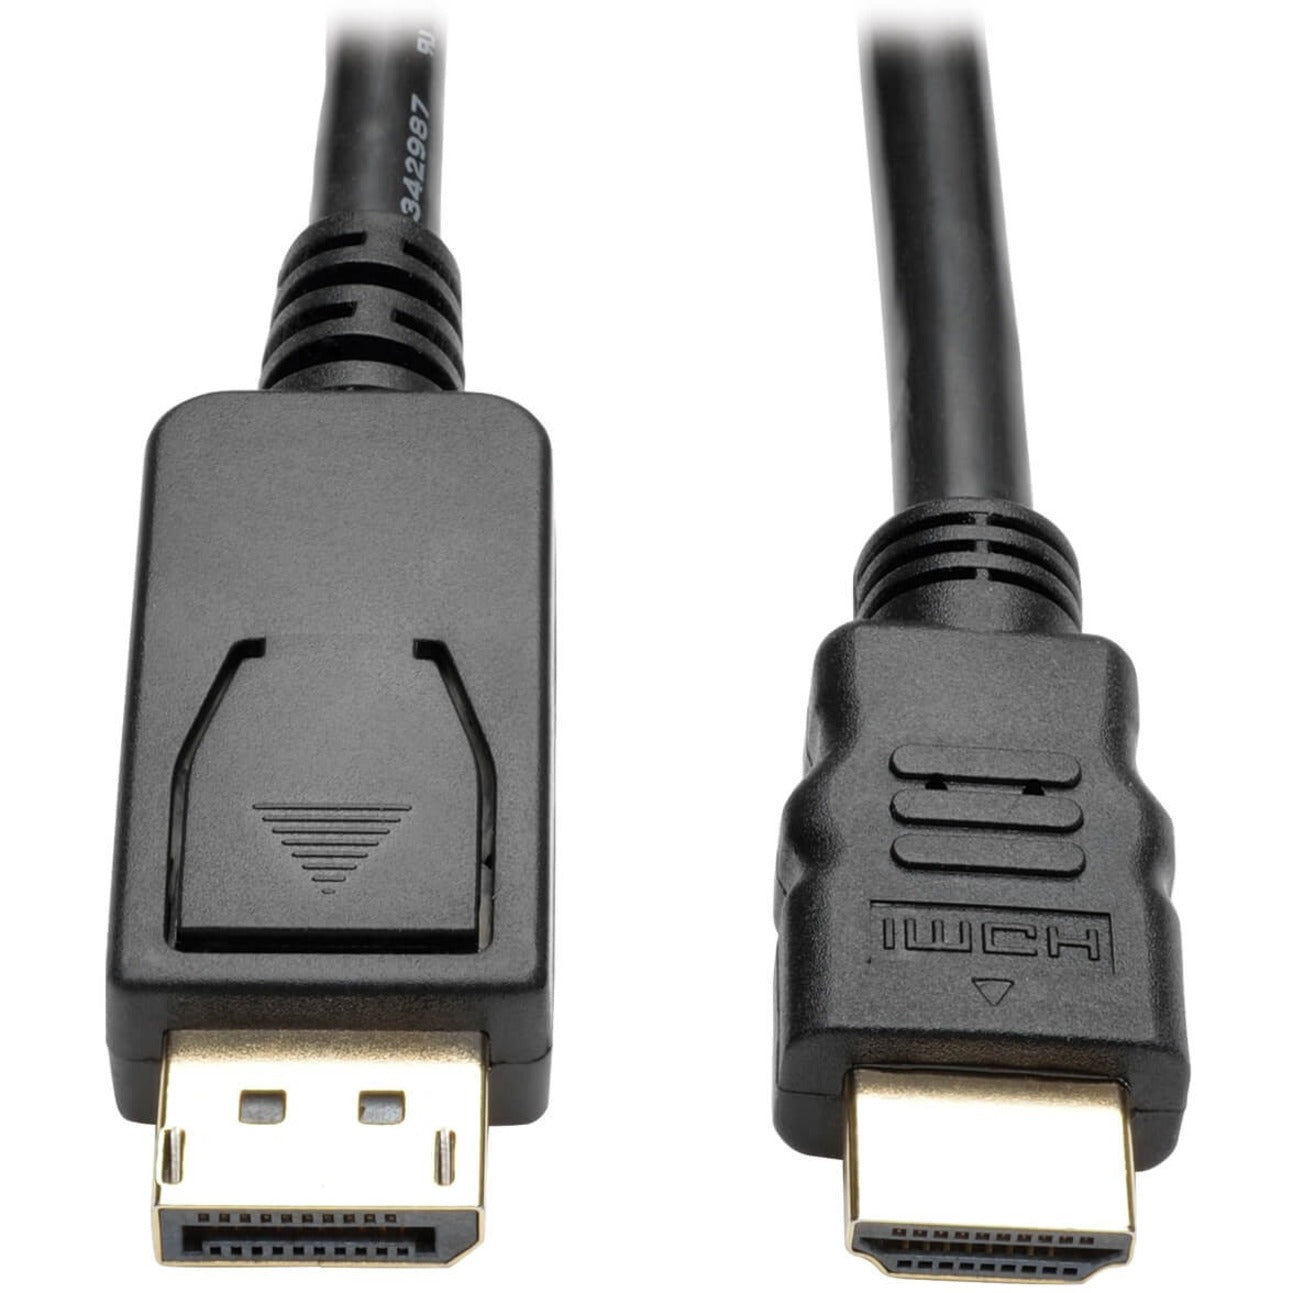 Tripp Lite P582-006-V2 DisplayPort 1.2 to HDMI Adapter Cable, 6 ft. UHD, Gold-Plated Connectors, Black